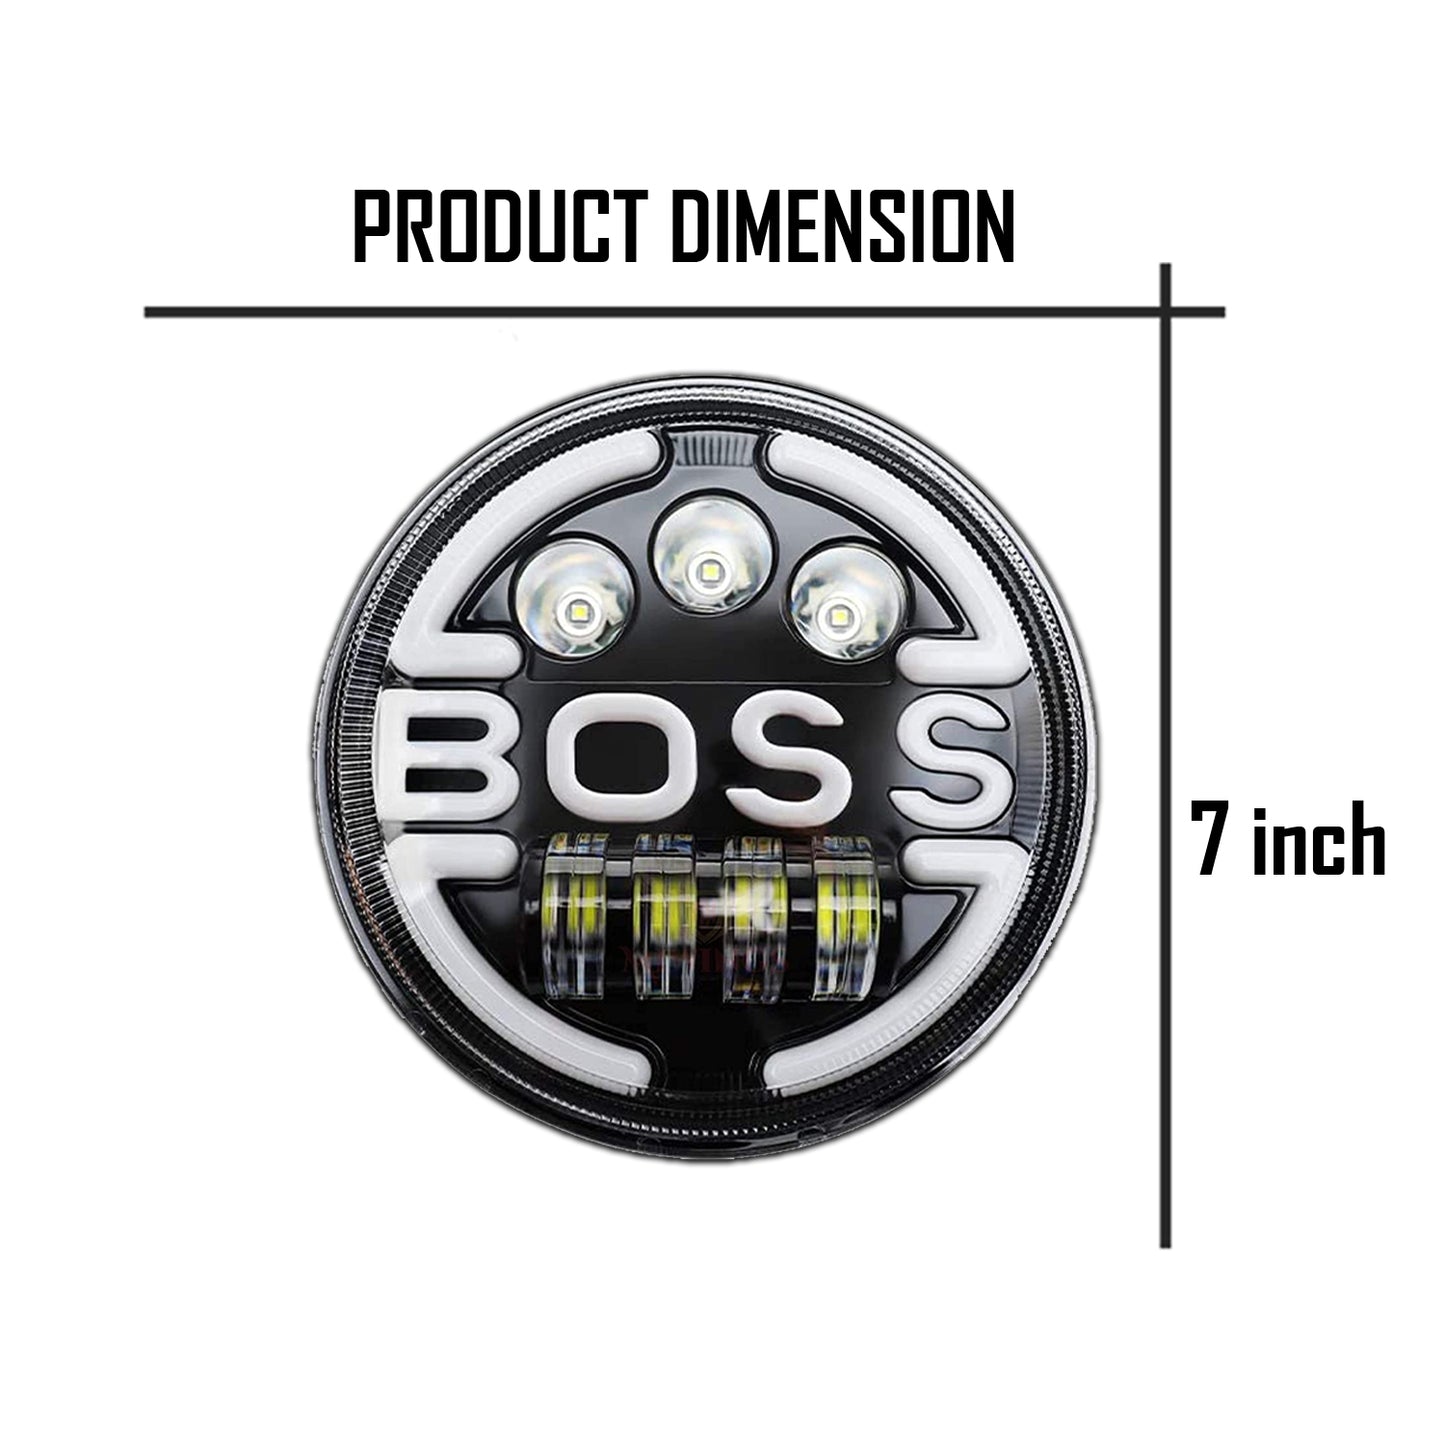 7 Inch Round Headlight Compatible with Royal Enfield, Jeep & Harley Davidson (Harley Boss Headlight) - bikerstore.in